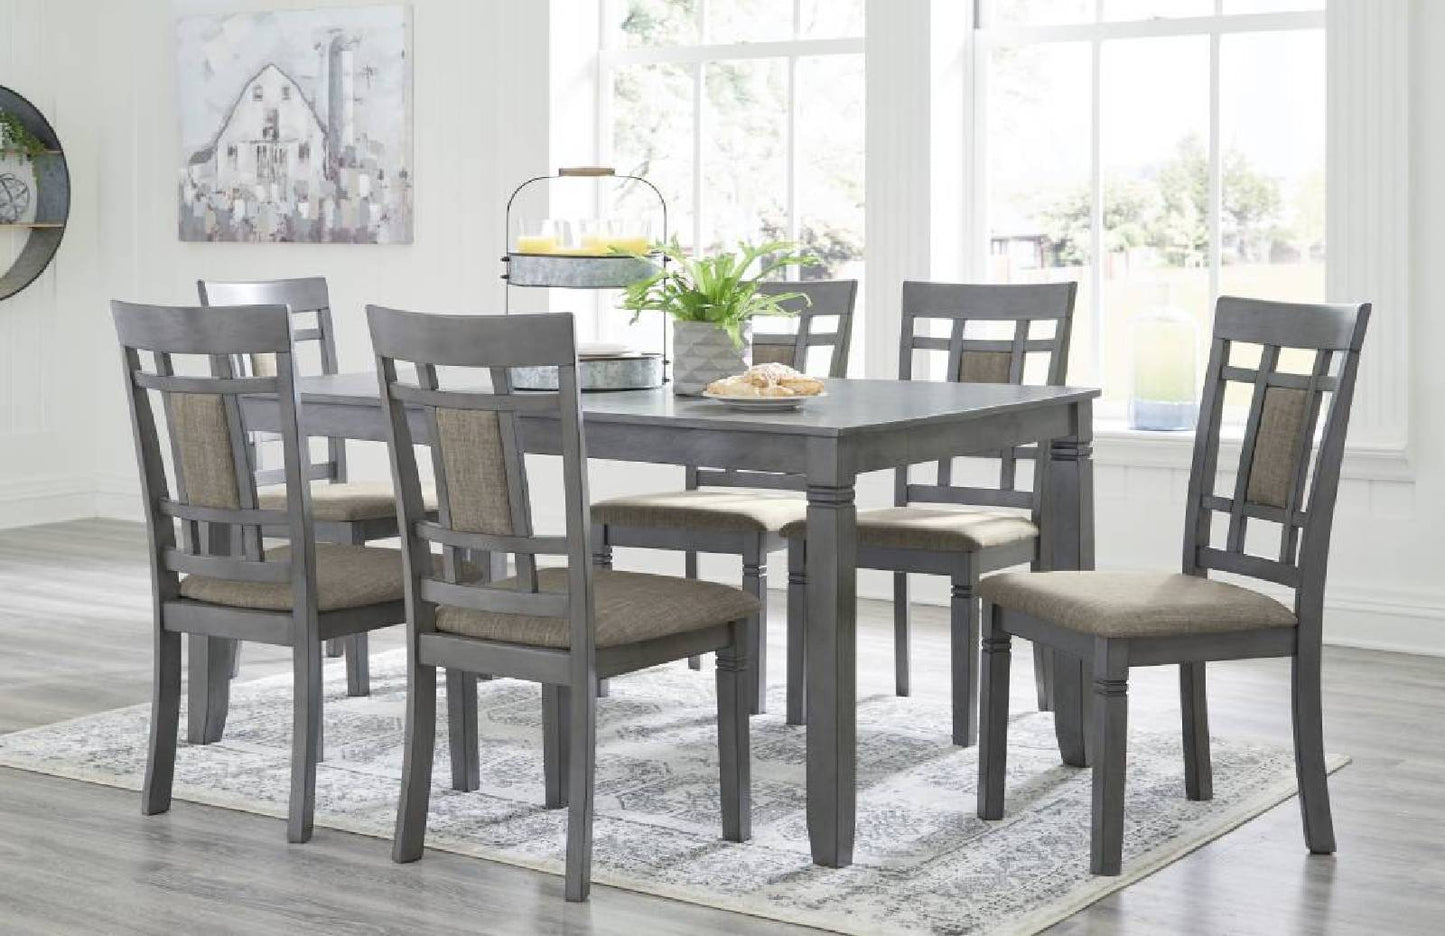 Jayemyer Charcoal Gray Dining Table and Chairs (Set of 7) | D368-425